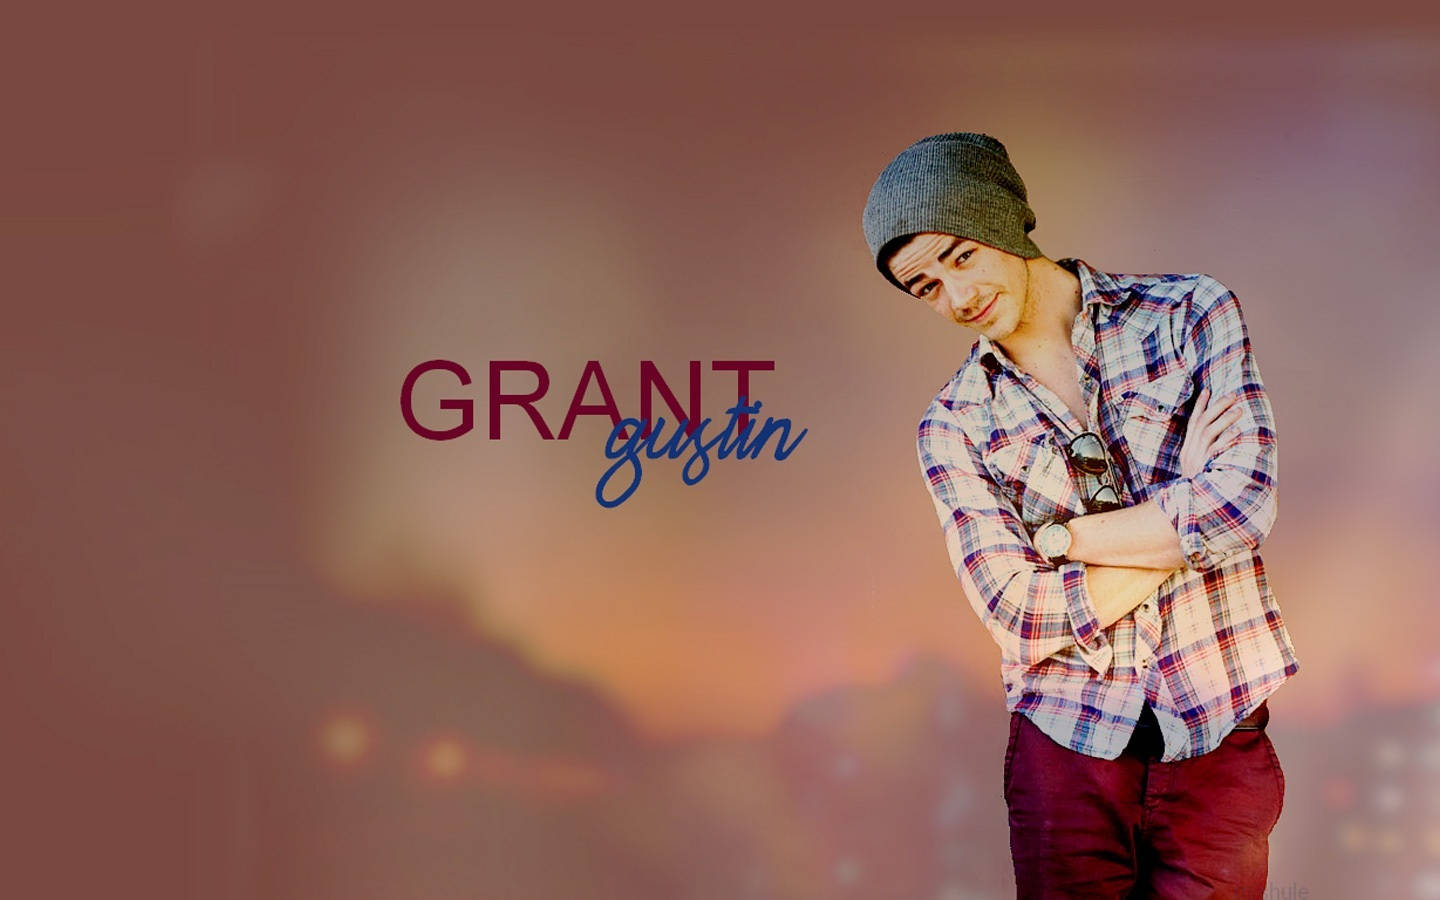 Grant Gustin Young Celebrity Wallpaper